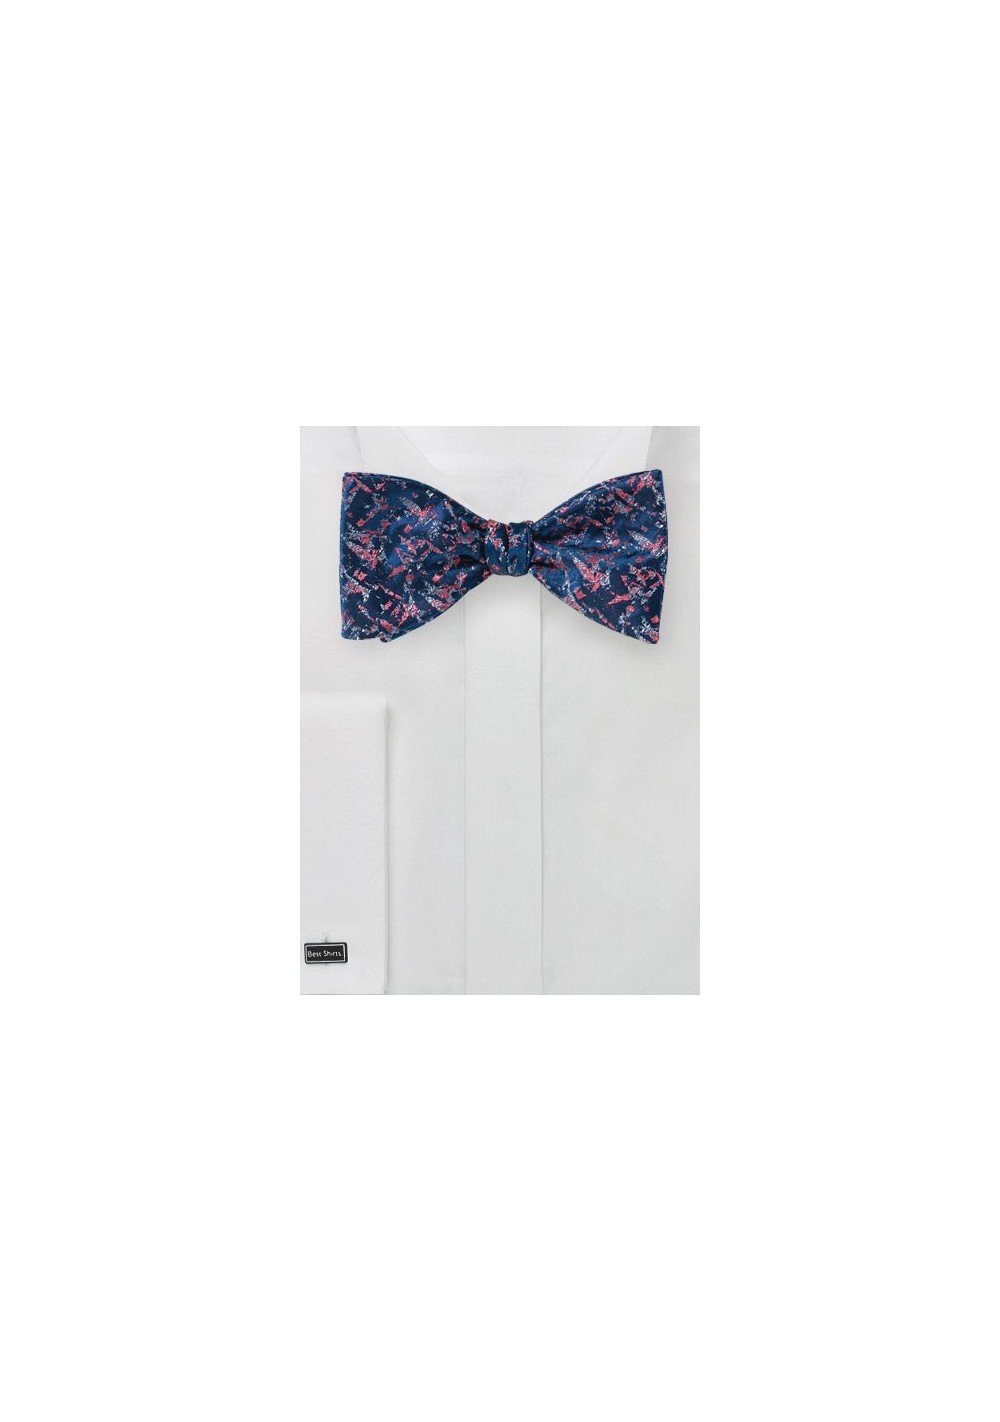 Abstract Art Bow Tie in Navy and Coral